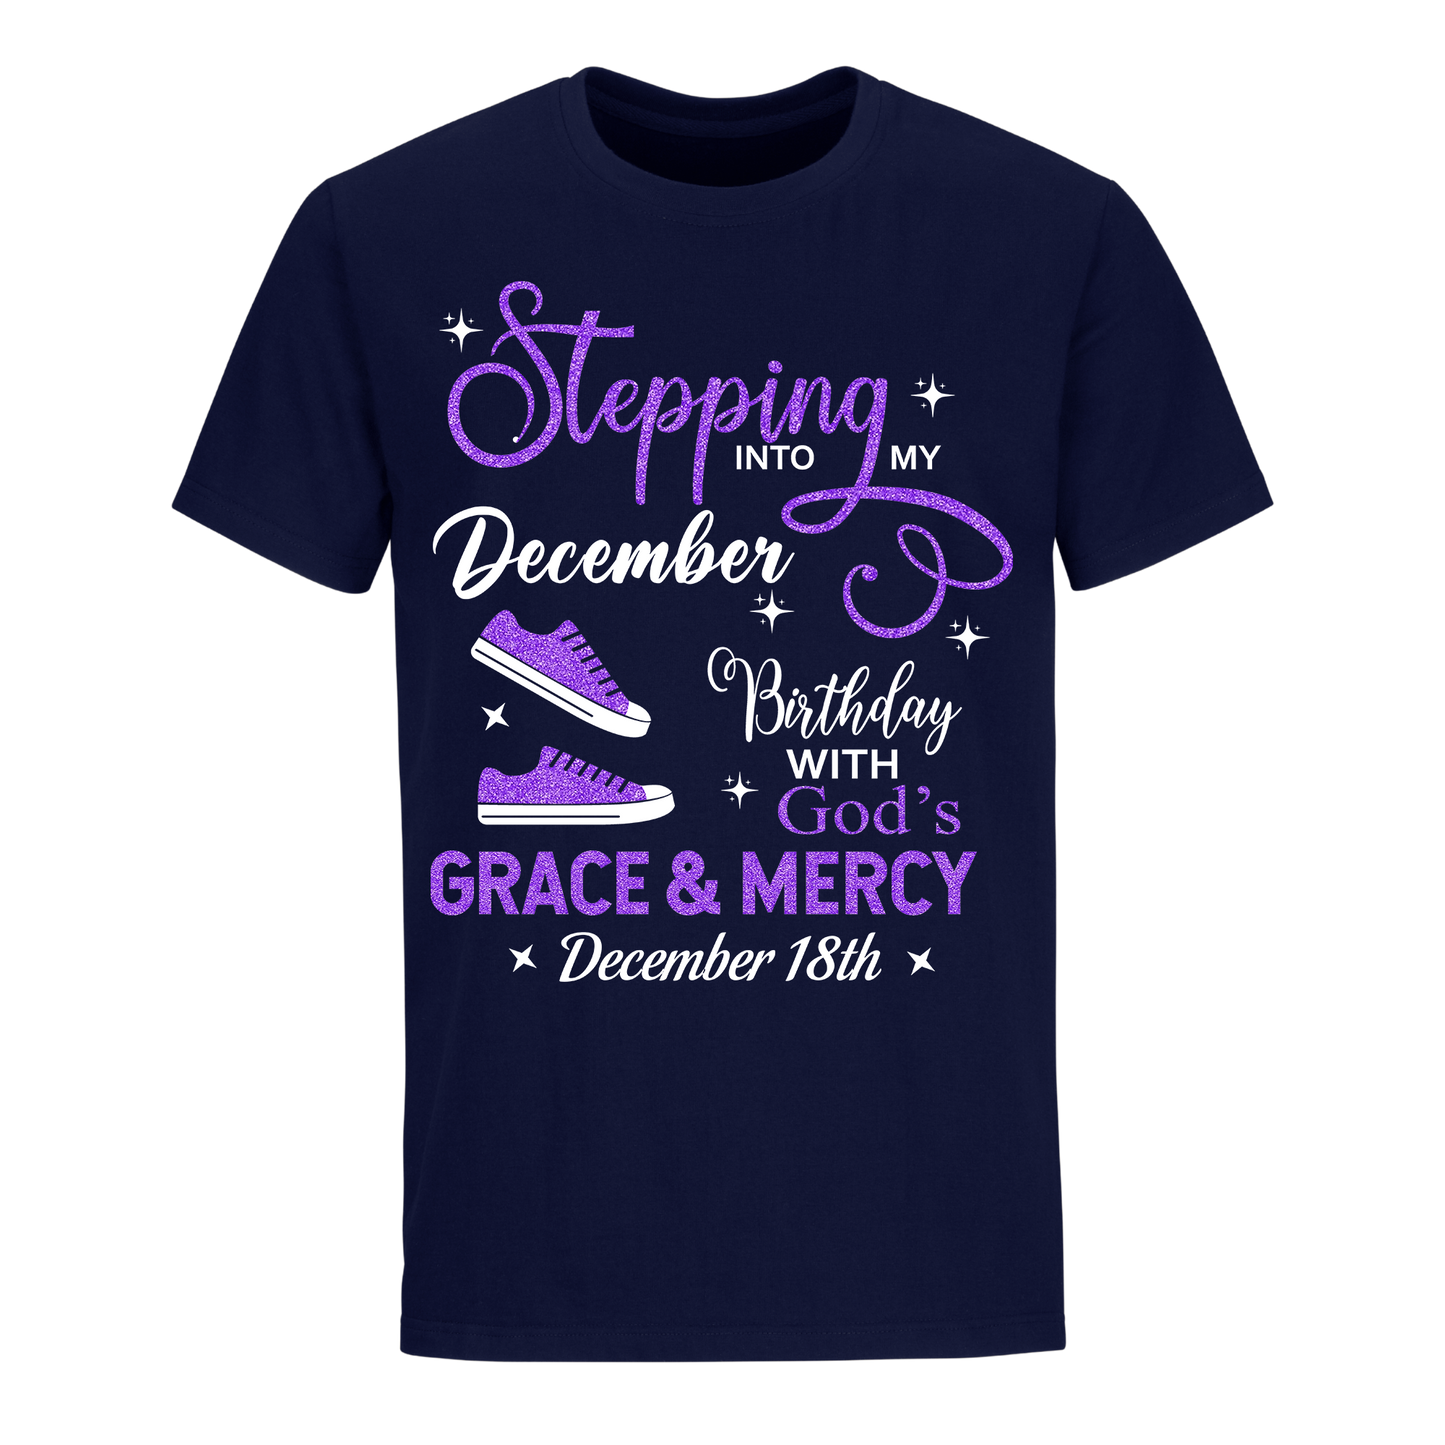 DECEMBER 18 GRACE AND MERCY